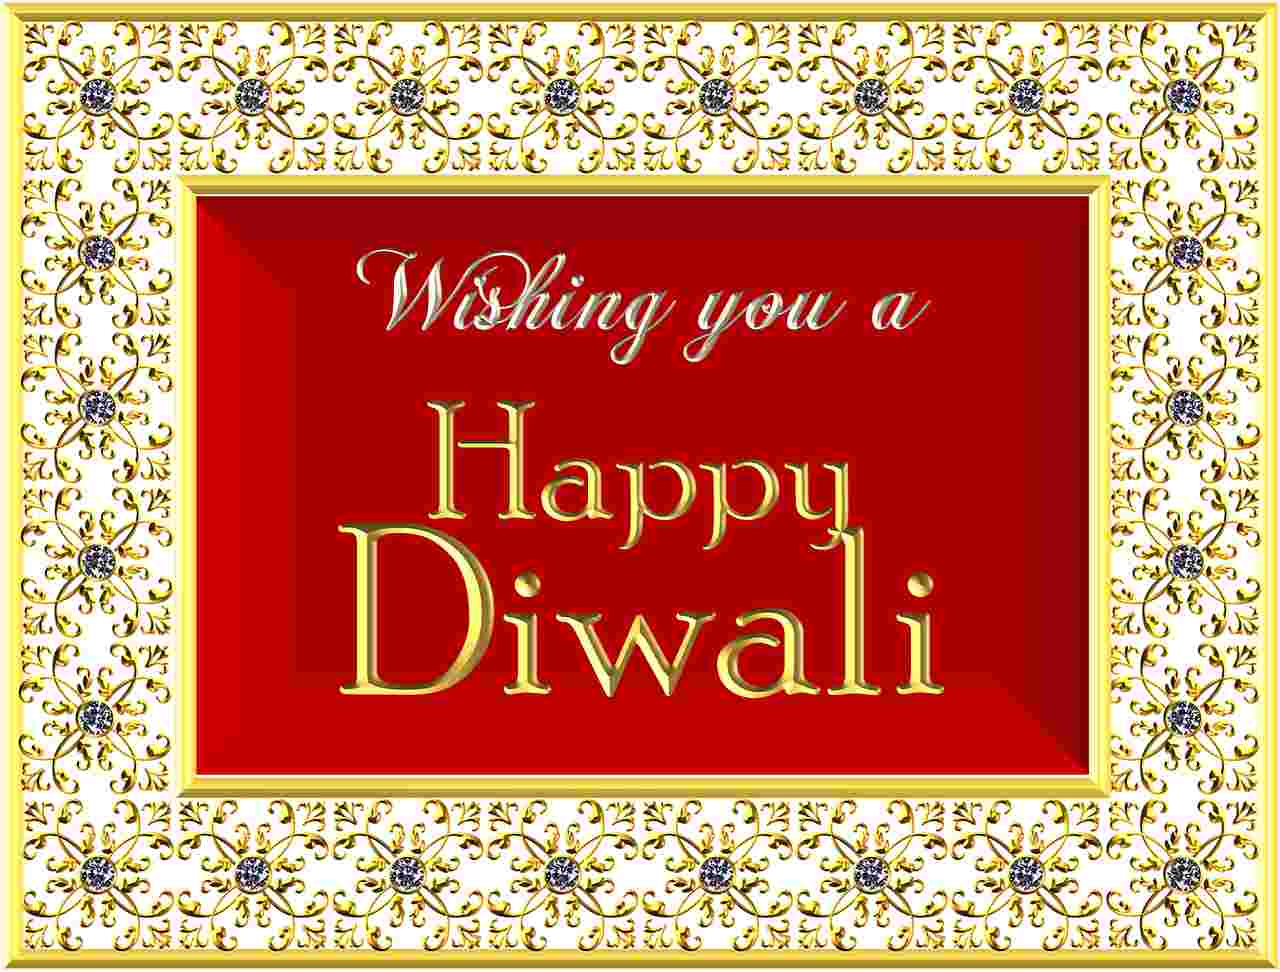 Happy Diwali Quotes, Wishes and Greetings 2022